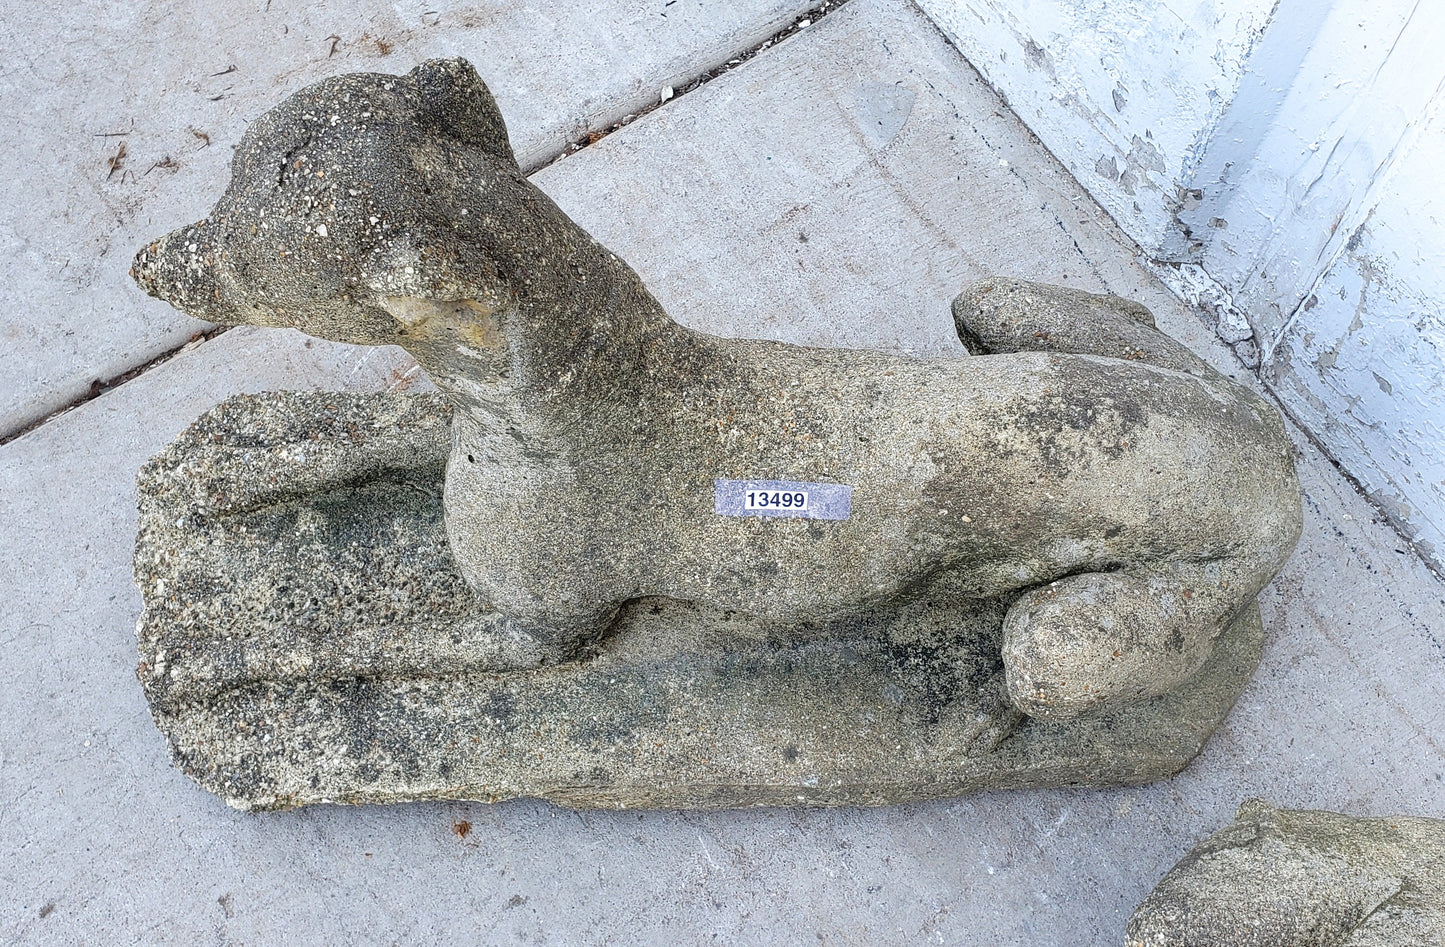 Pair of Concrete Greyhounds Statues